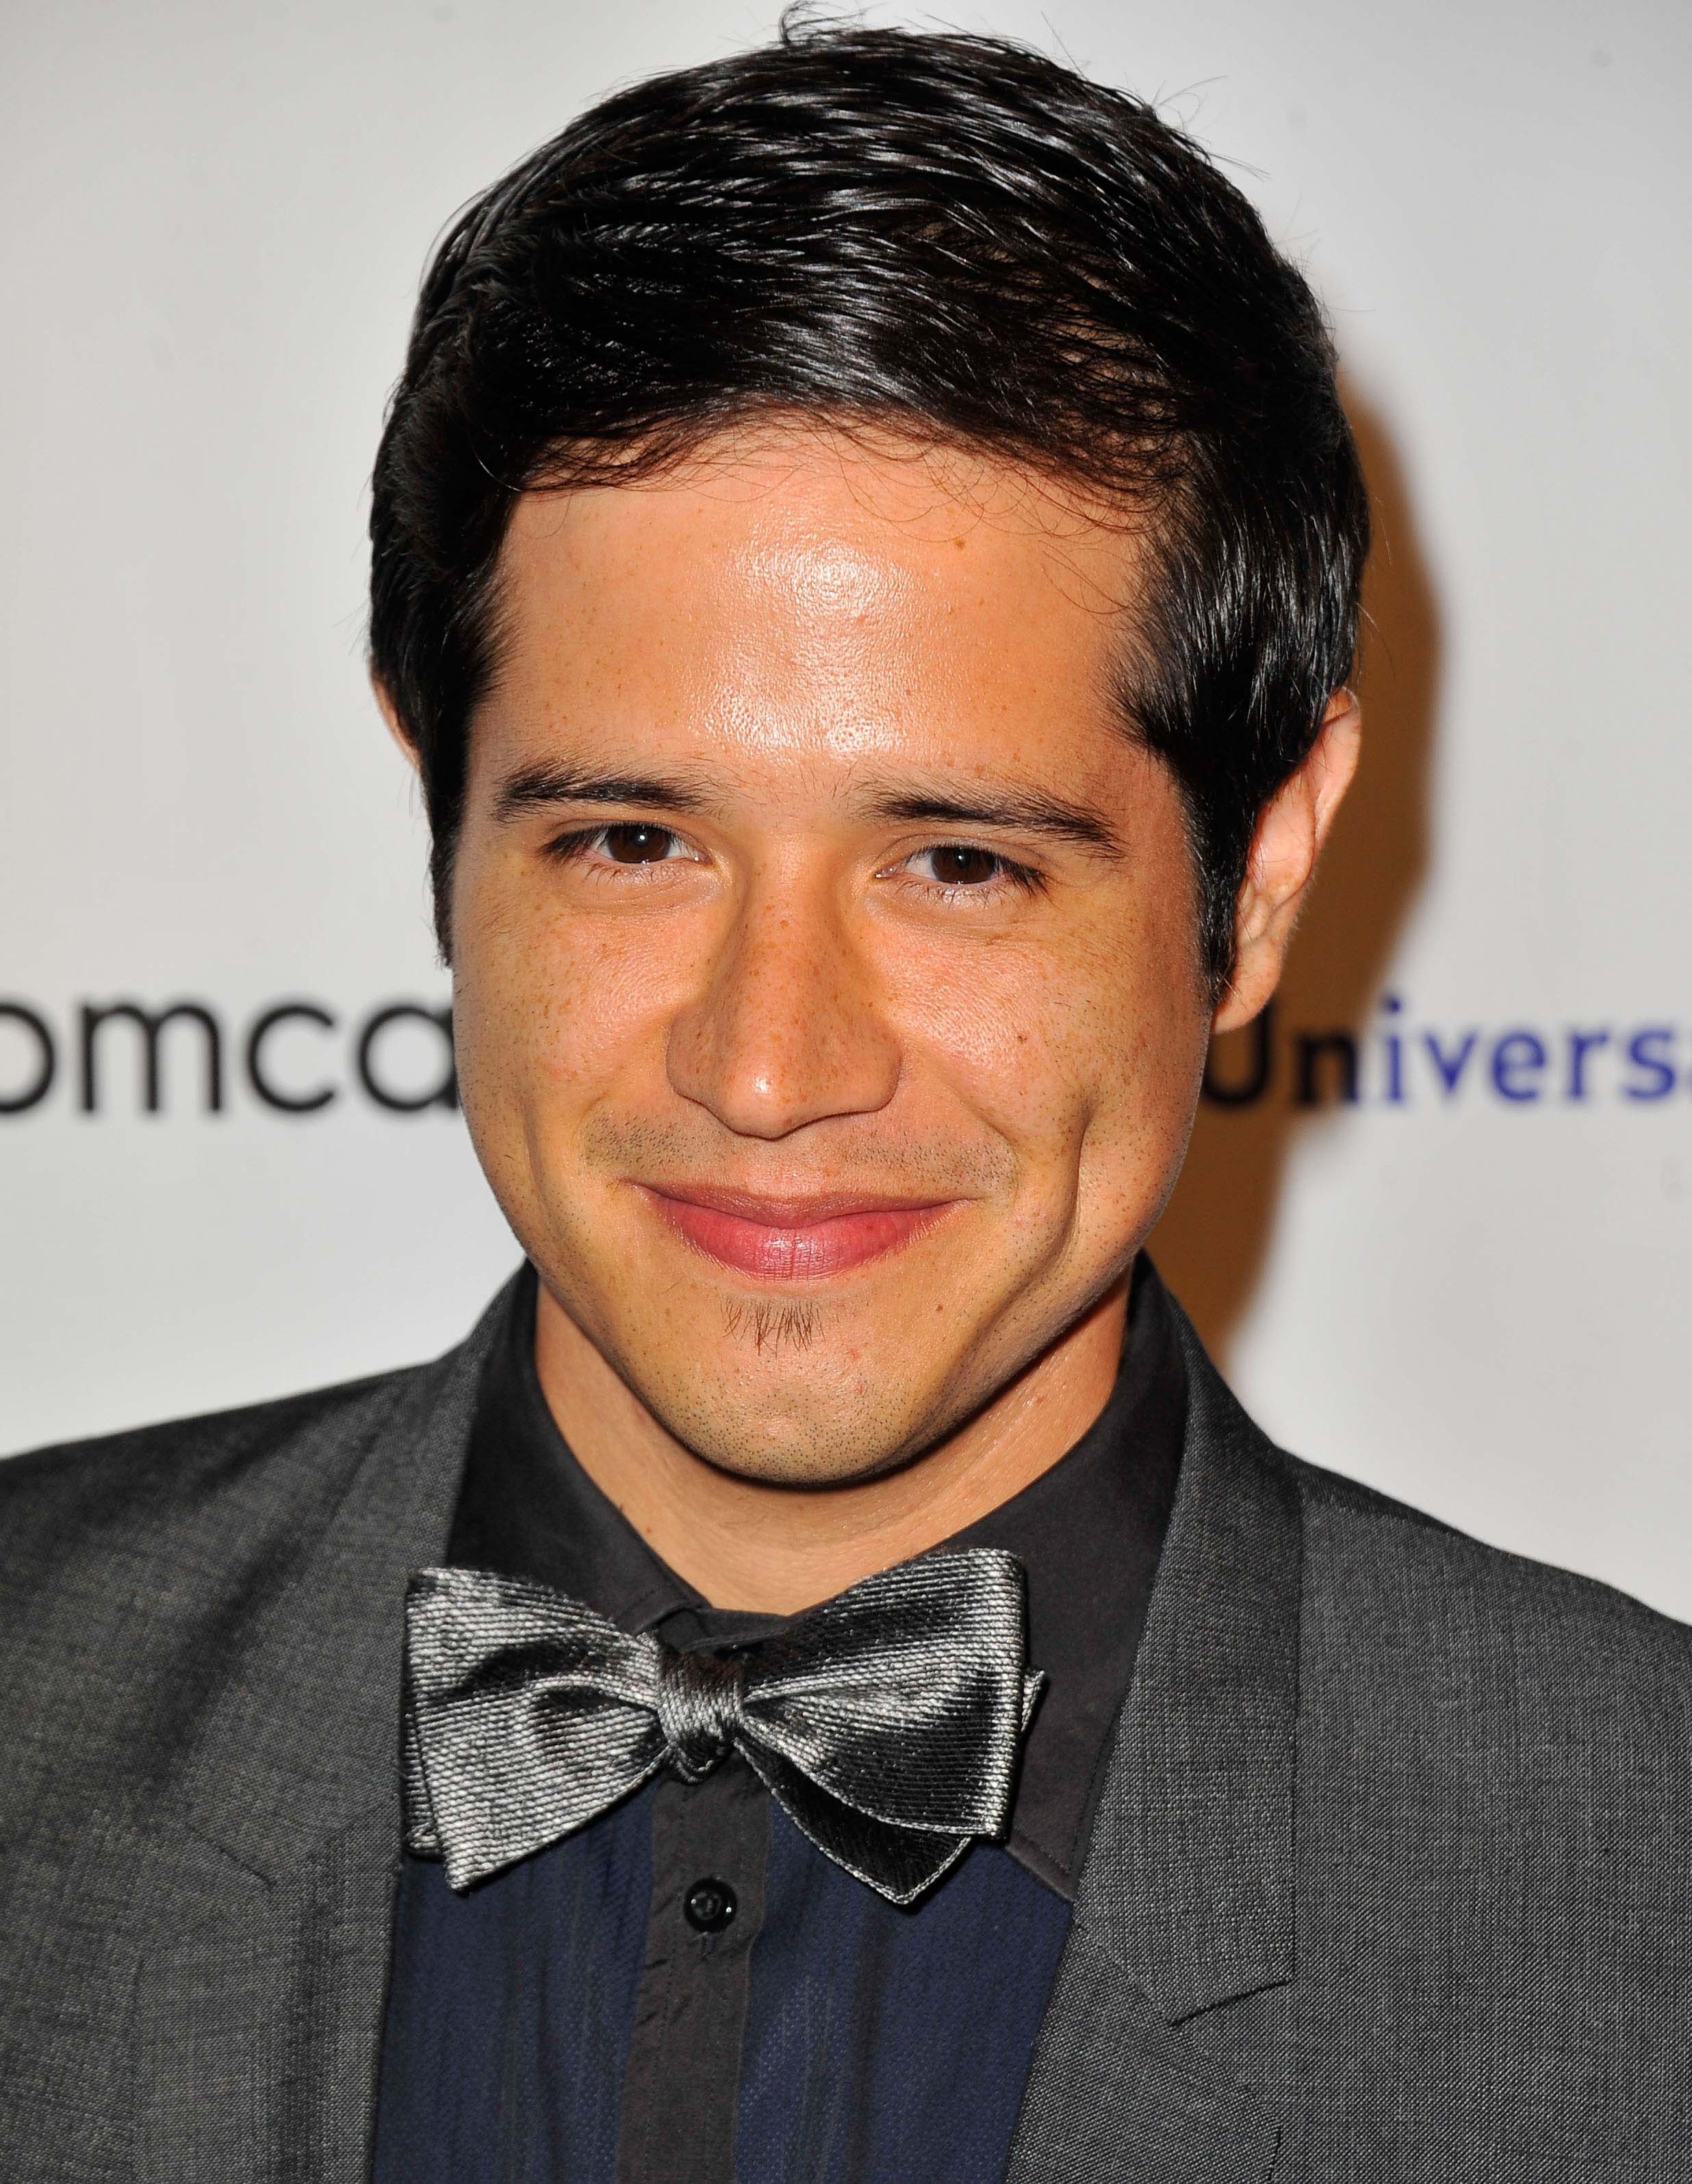 Jorge Diaz attending the 27th Annual Imagen Awards Held at the Beverly Hilton Hotel in Beverly Hills, California on August 10, 2012